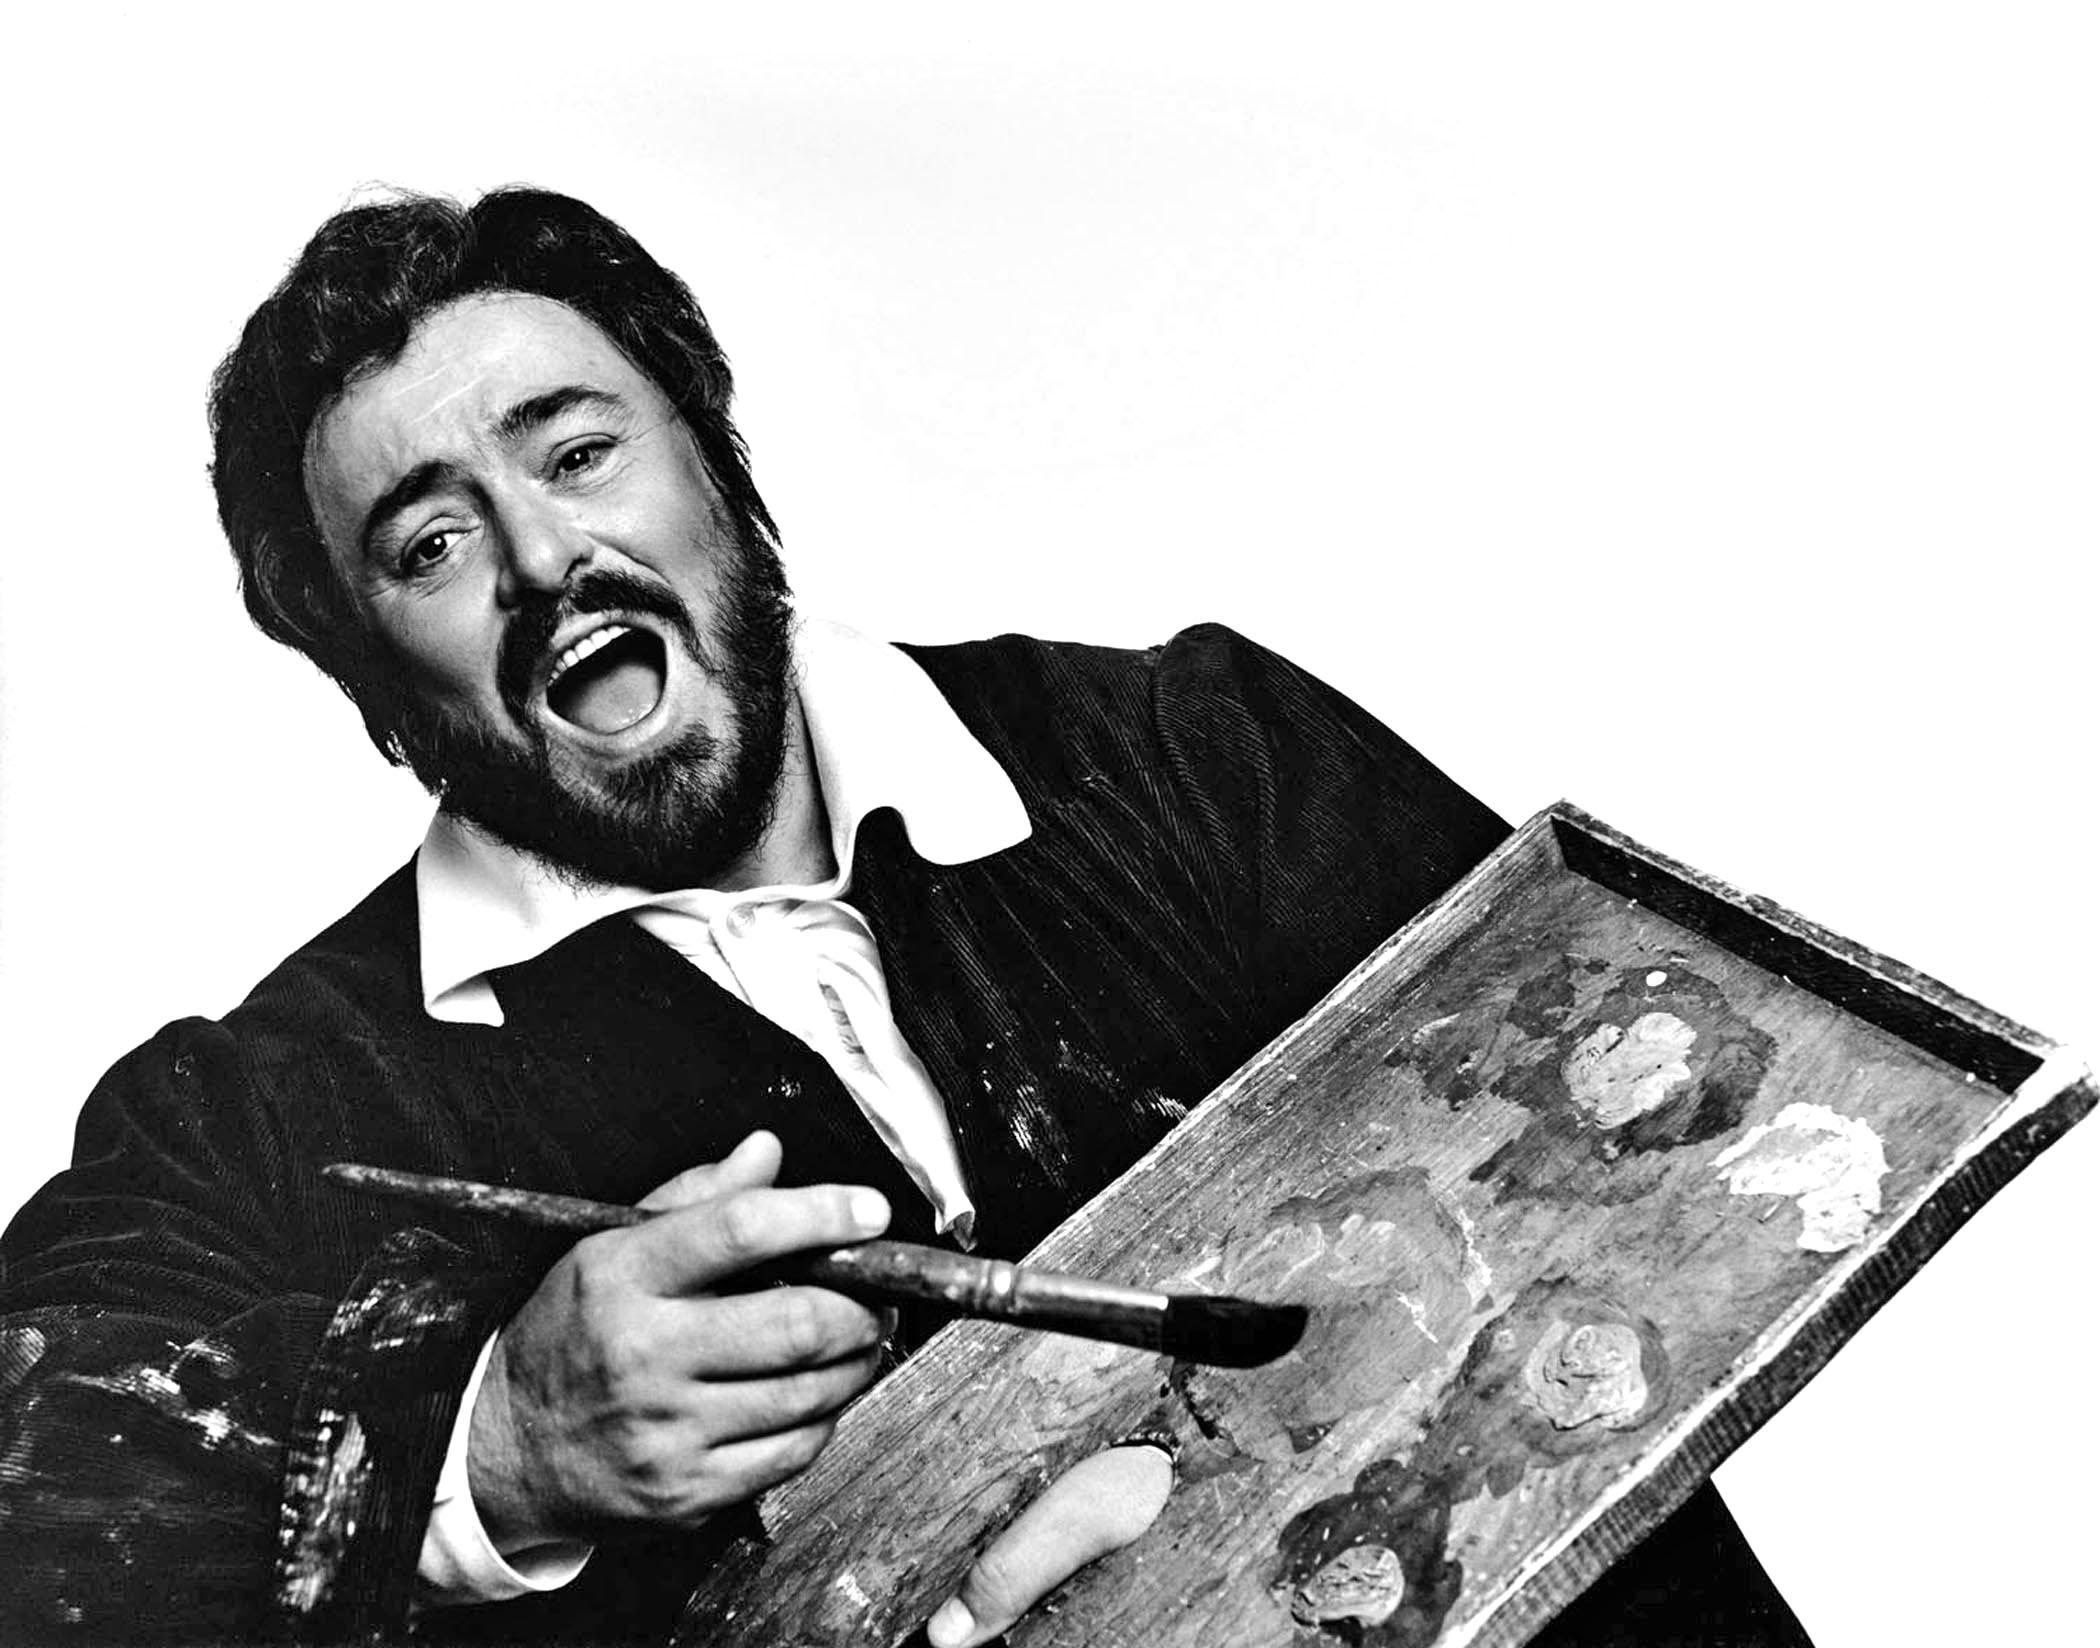 Jack Mitchell Black and White Photograph - Tenor Luciano Pavarotti performing in full costume for 'La Bohème' at the MET